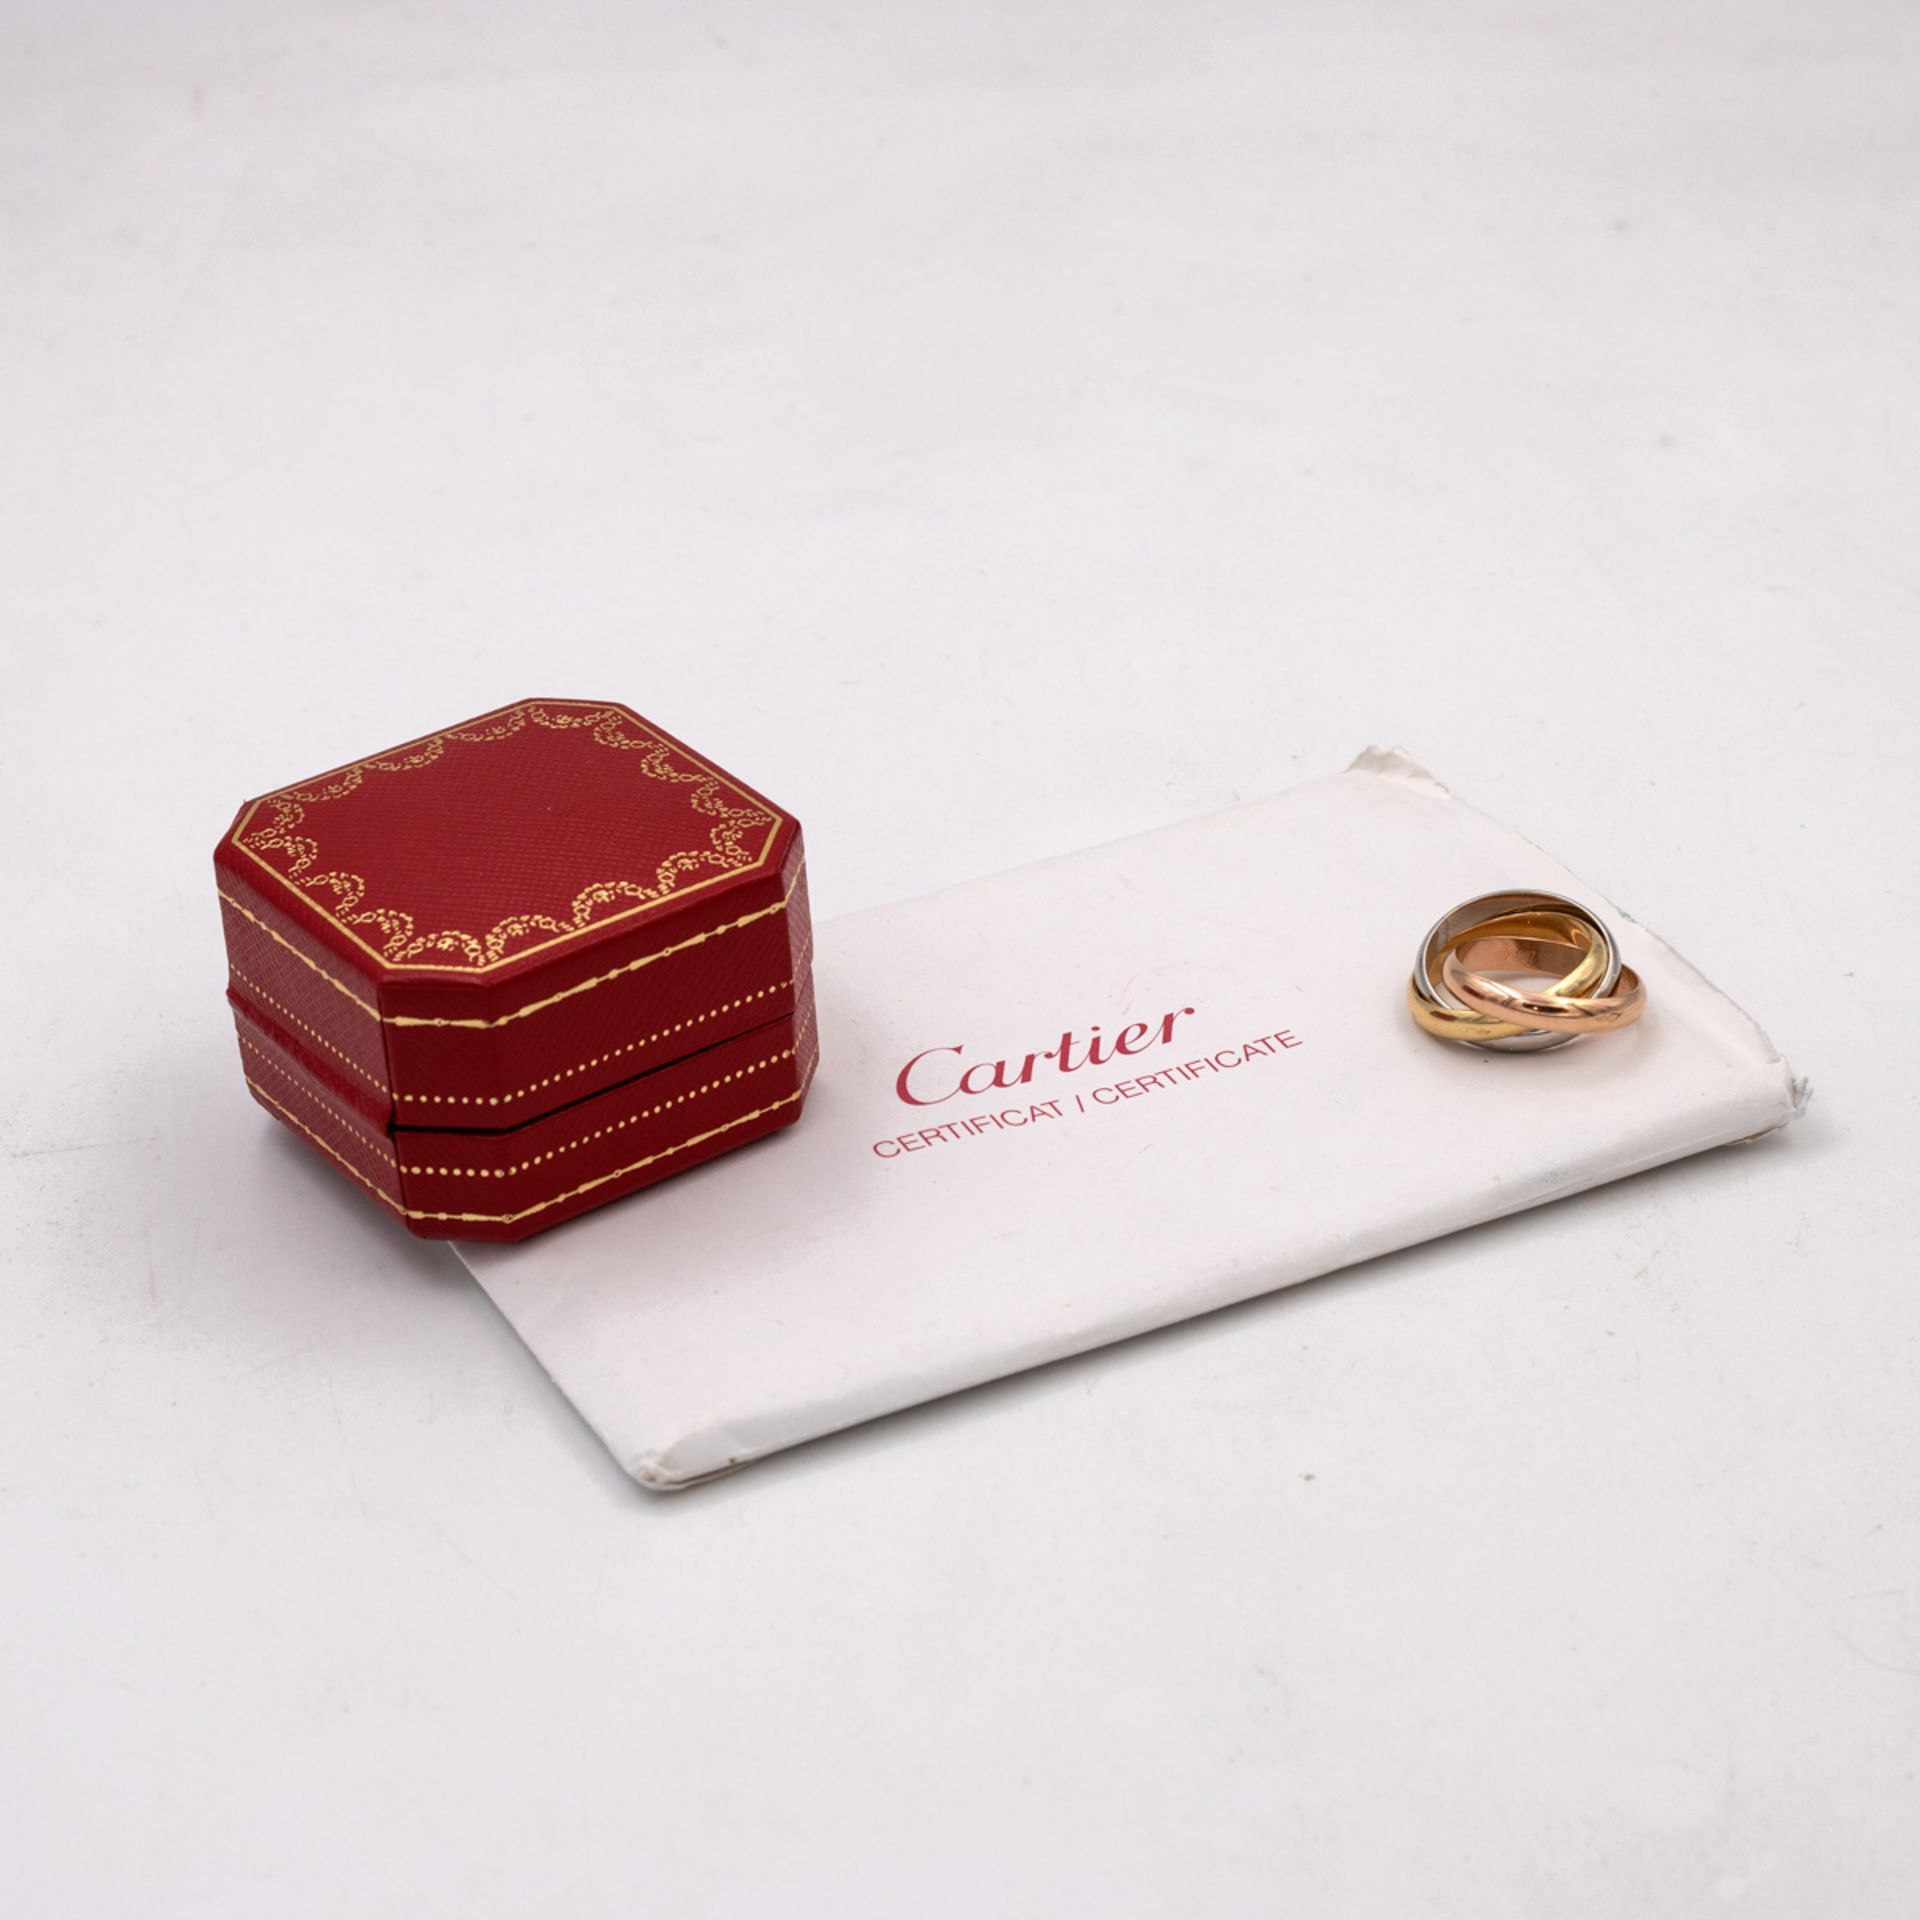 Cartier Trinity collection ring - Image 2 of 2